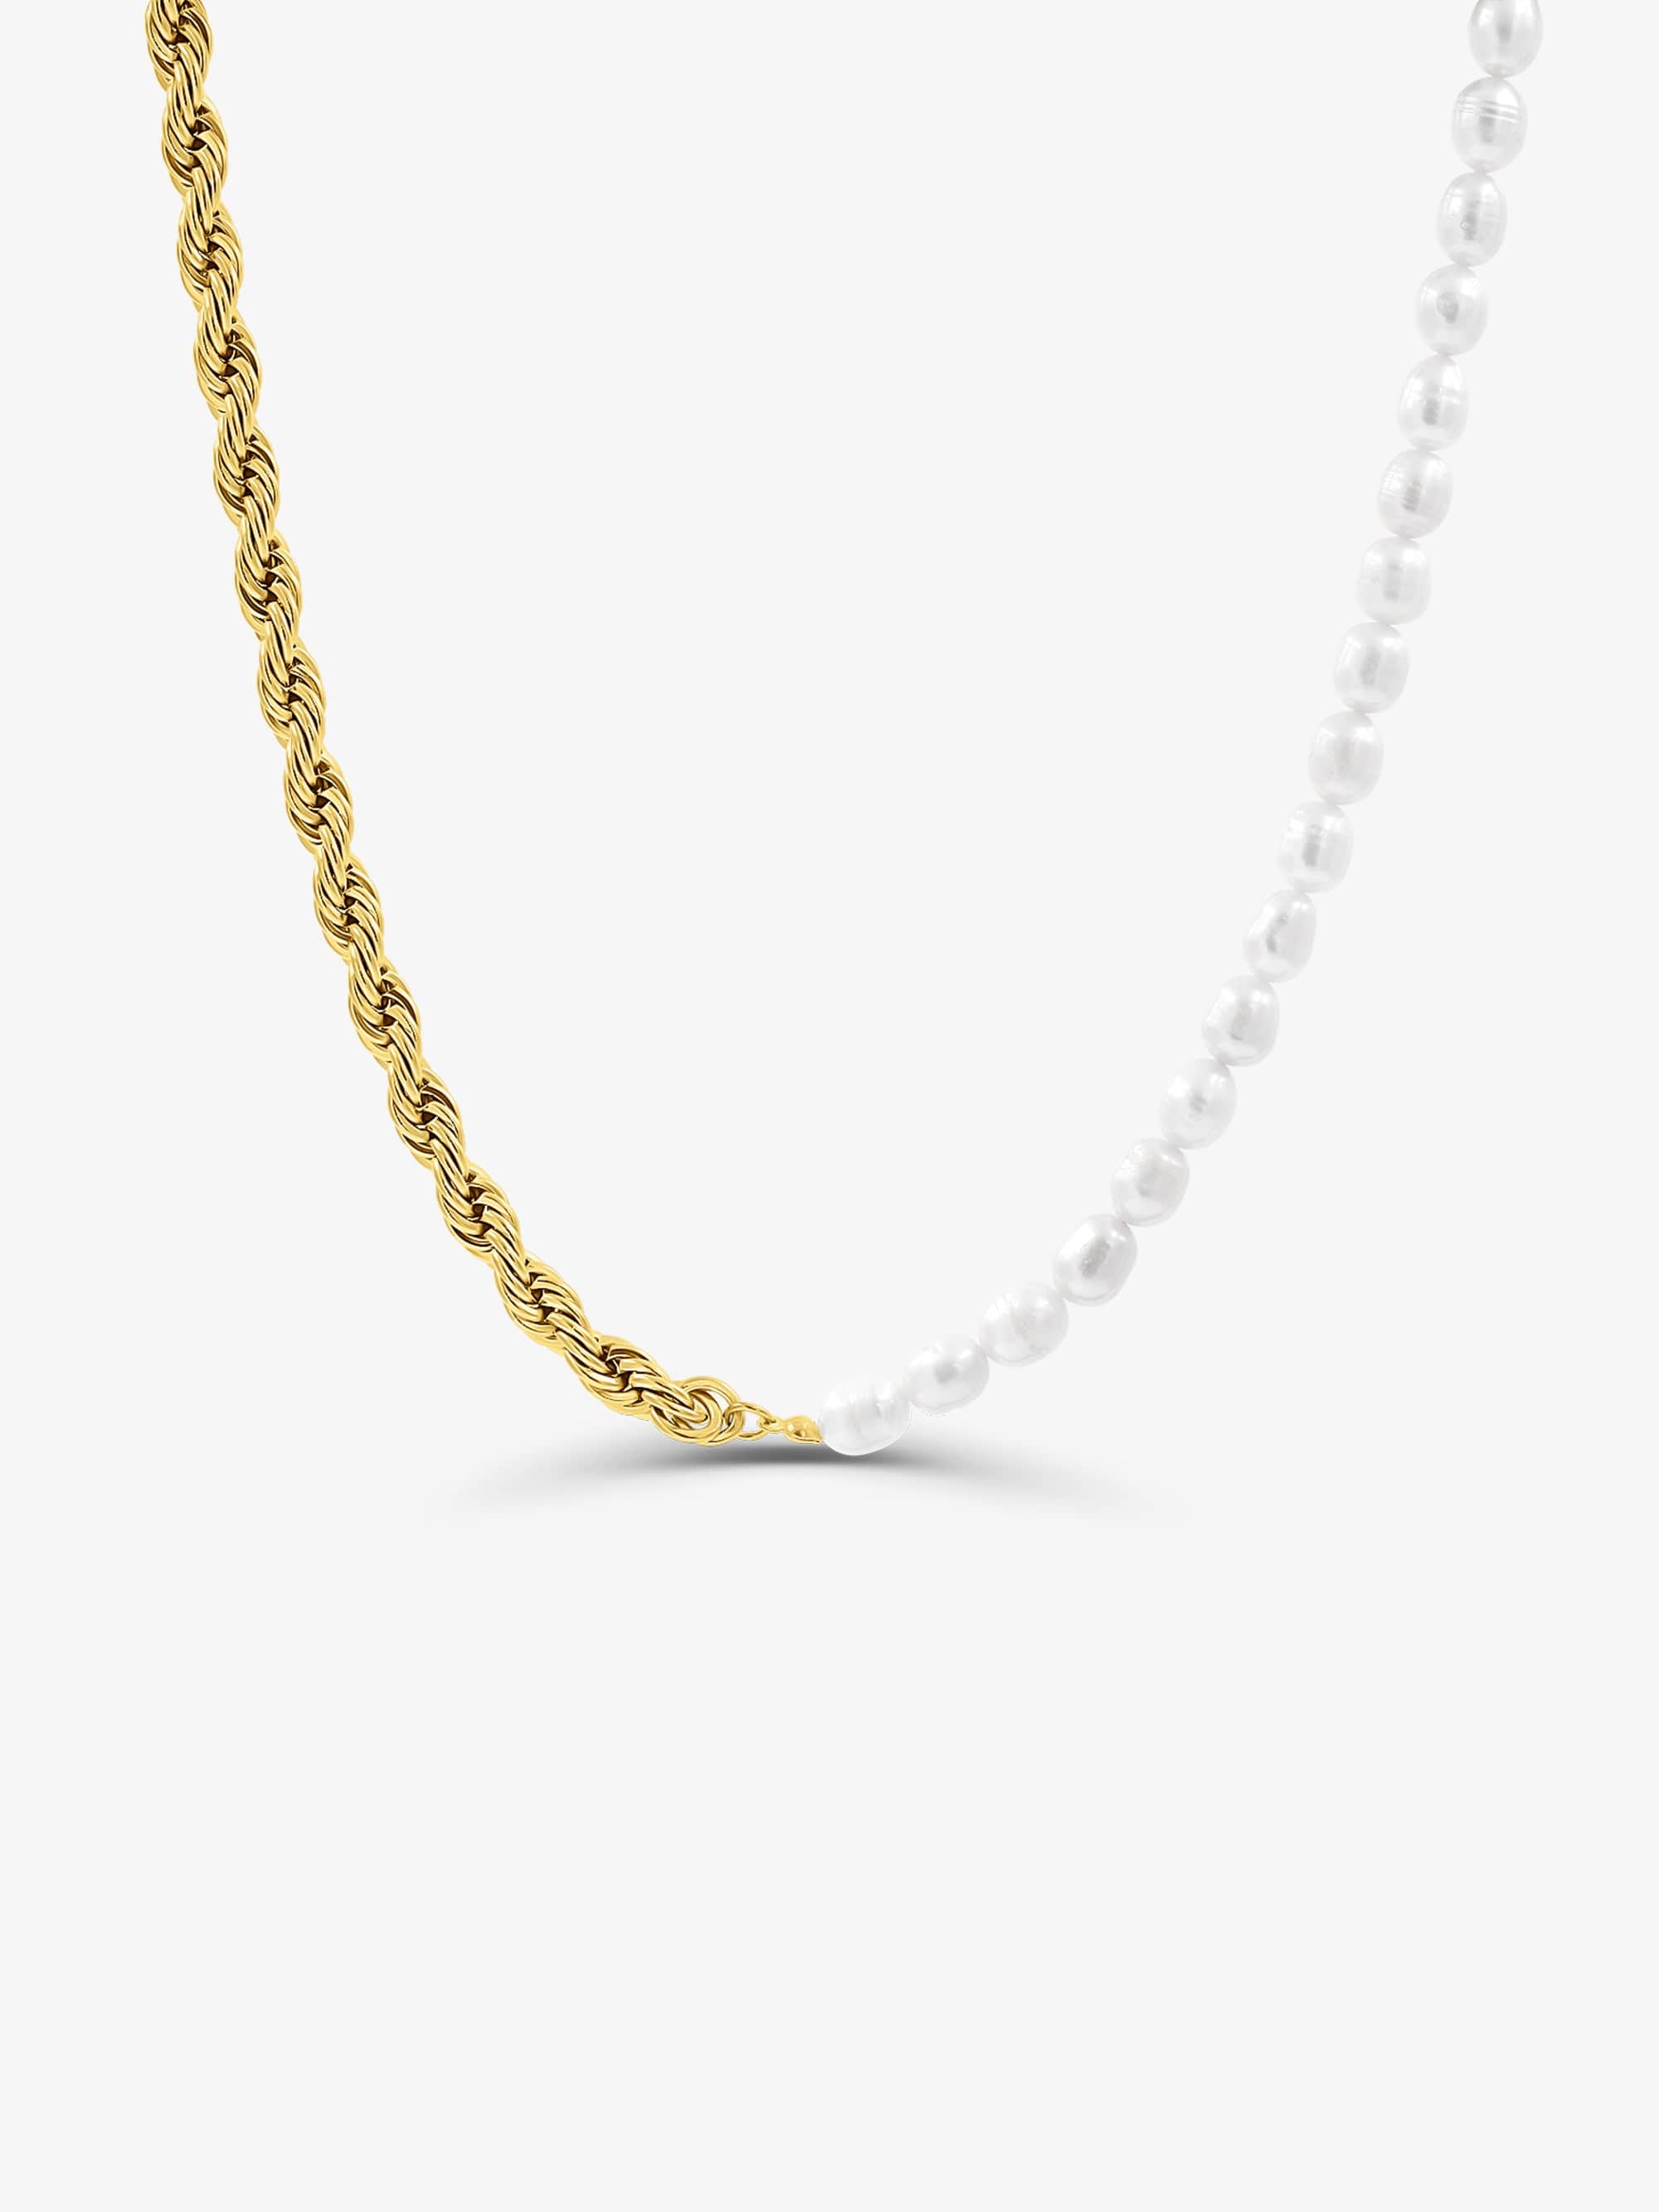 Sultana-Malta NECKLACES Rope Chain Fresh Pearl Necklace